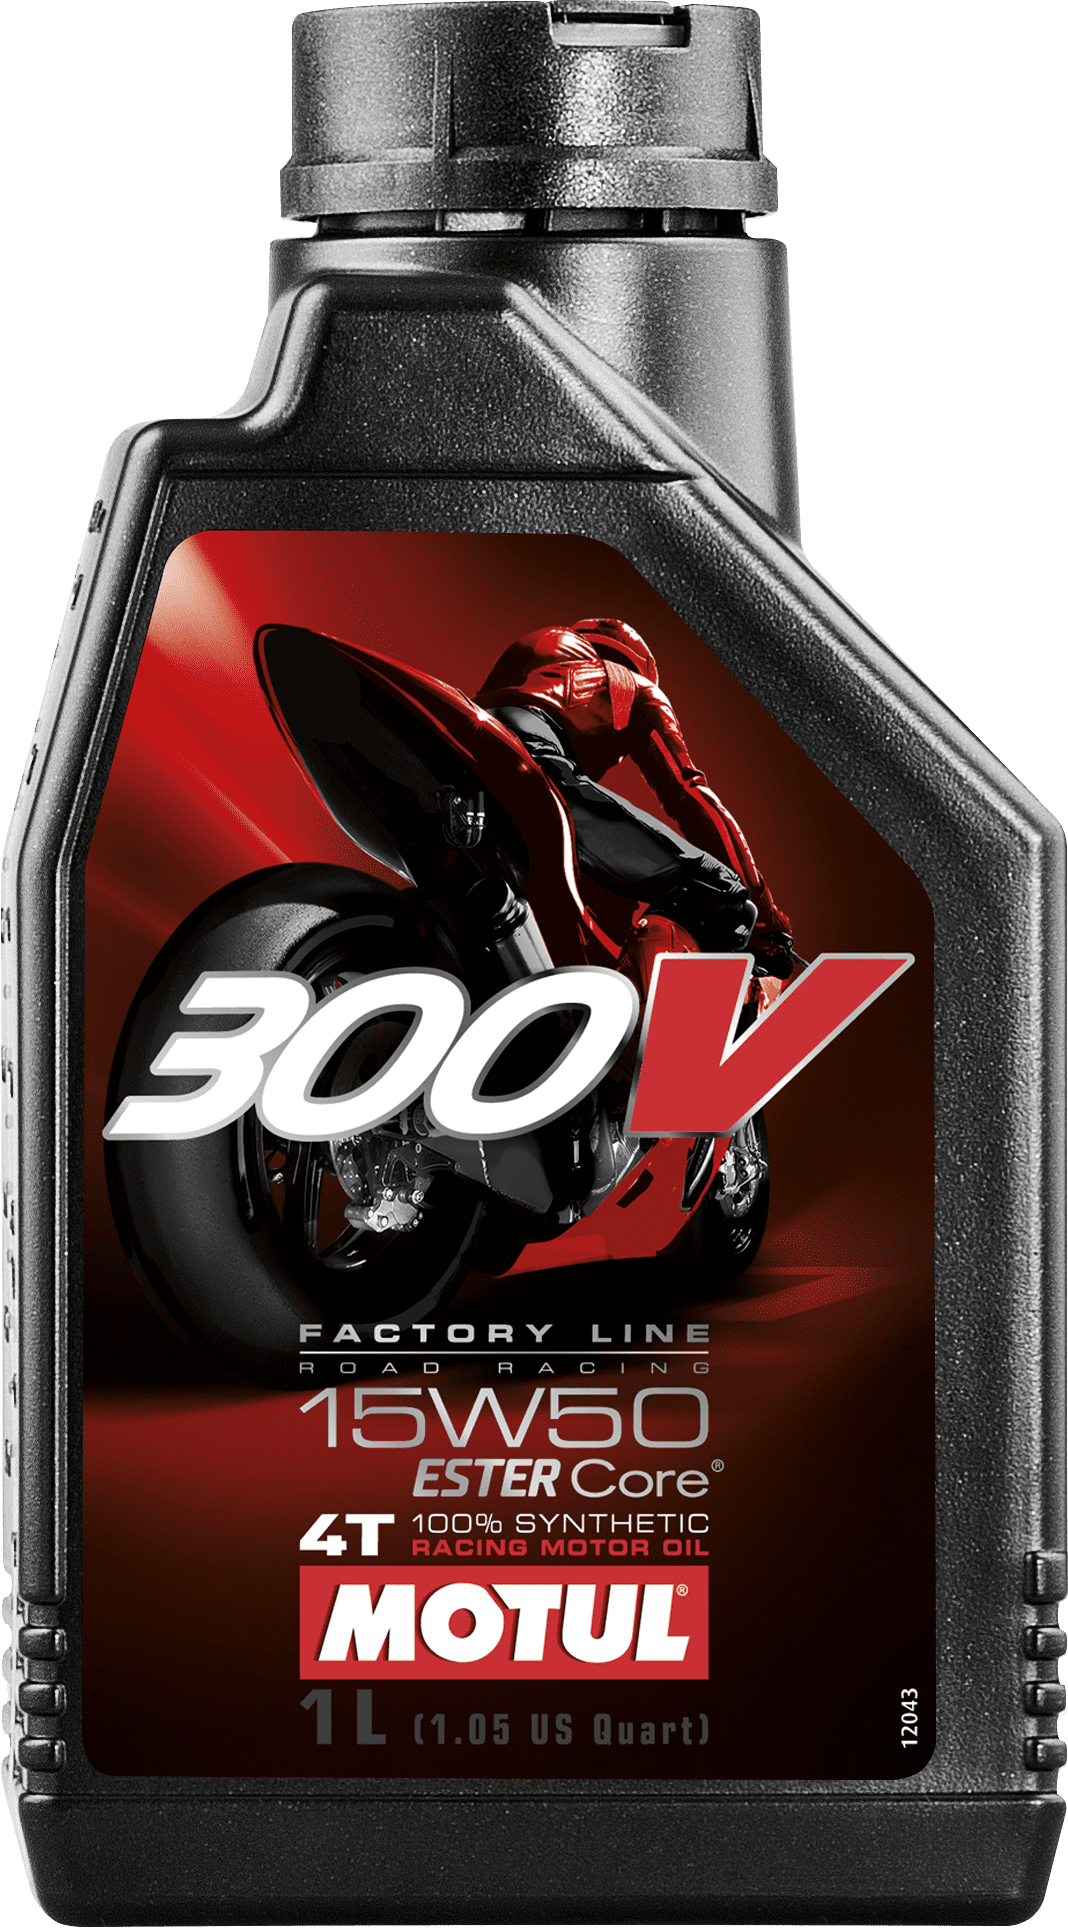 104125-1 100% Synthetic racing motor oil. Based on ESTER Core® technology and above all existing motorsport standards.